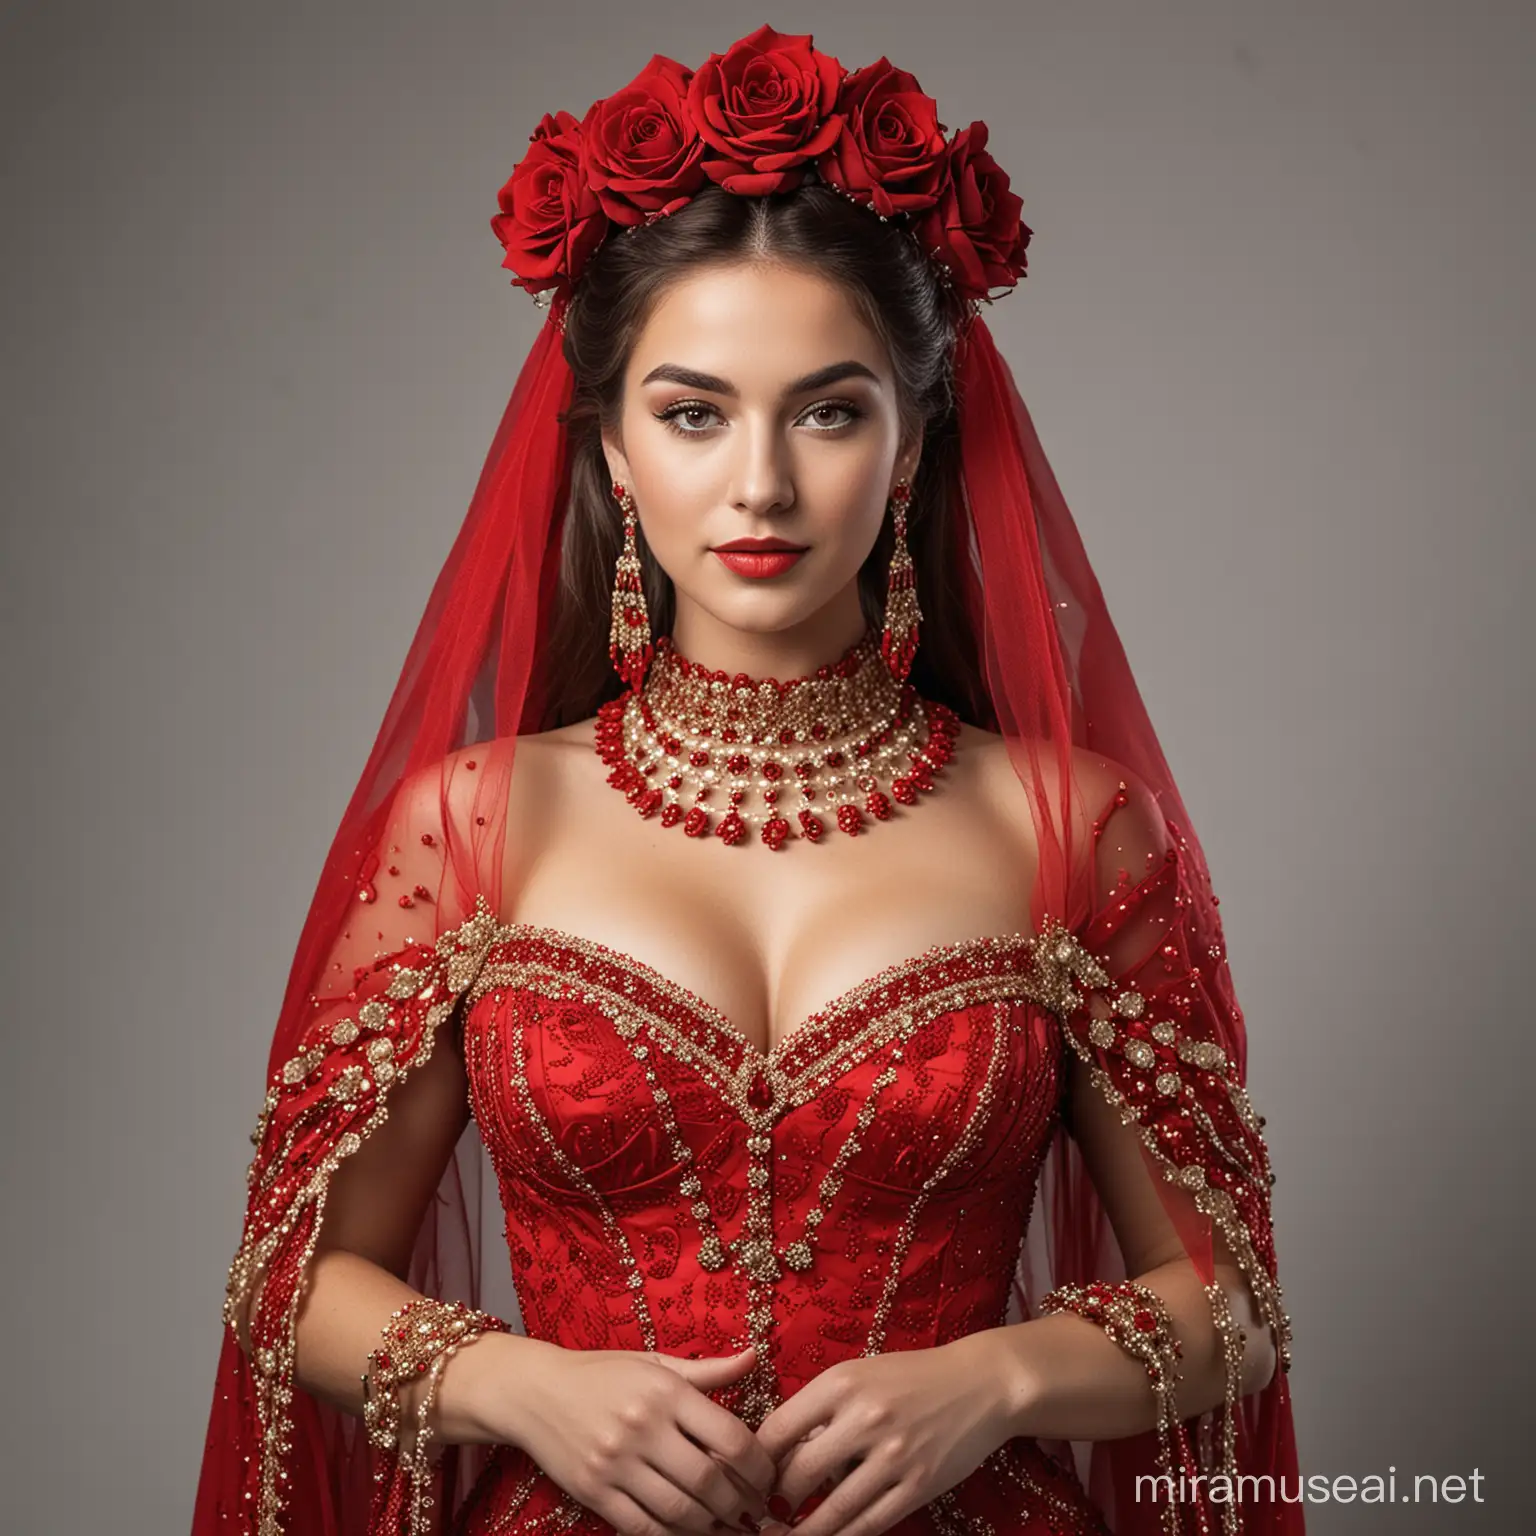 Red rose flowers queen with full dress
